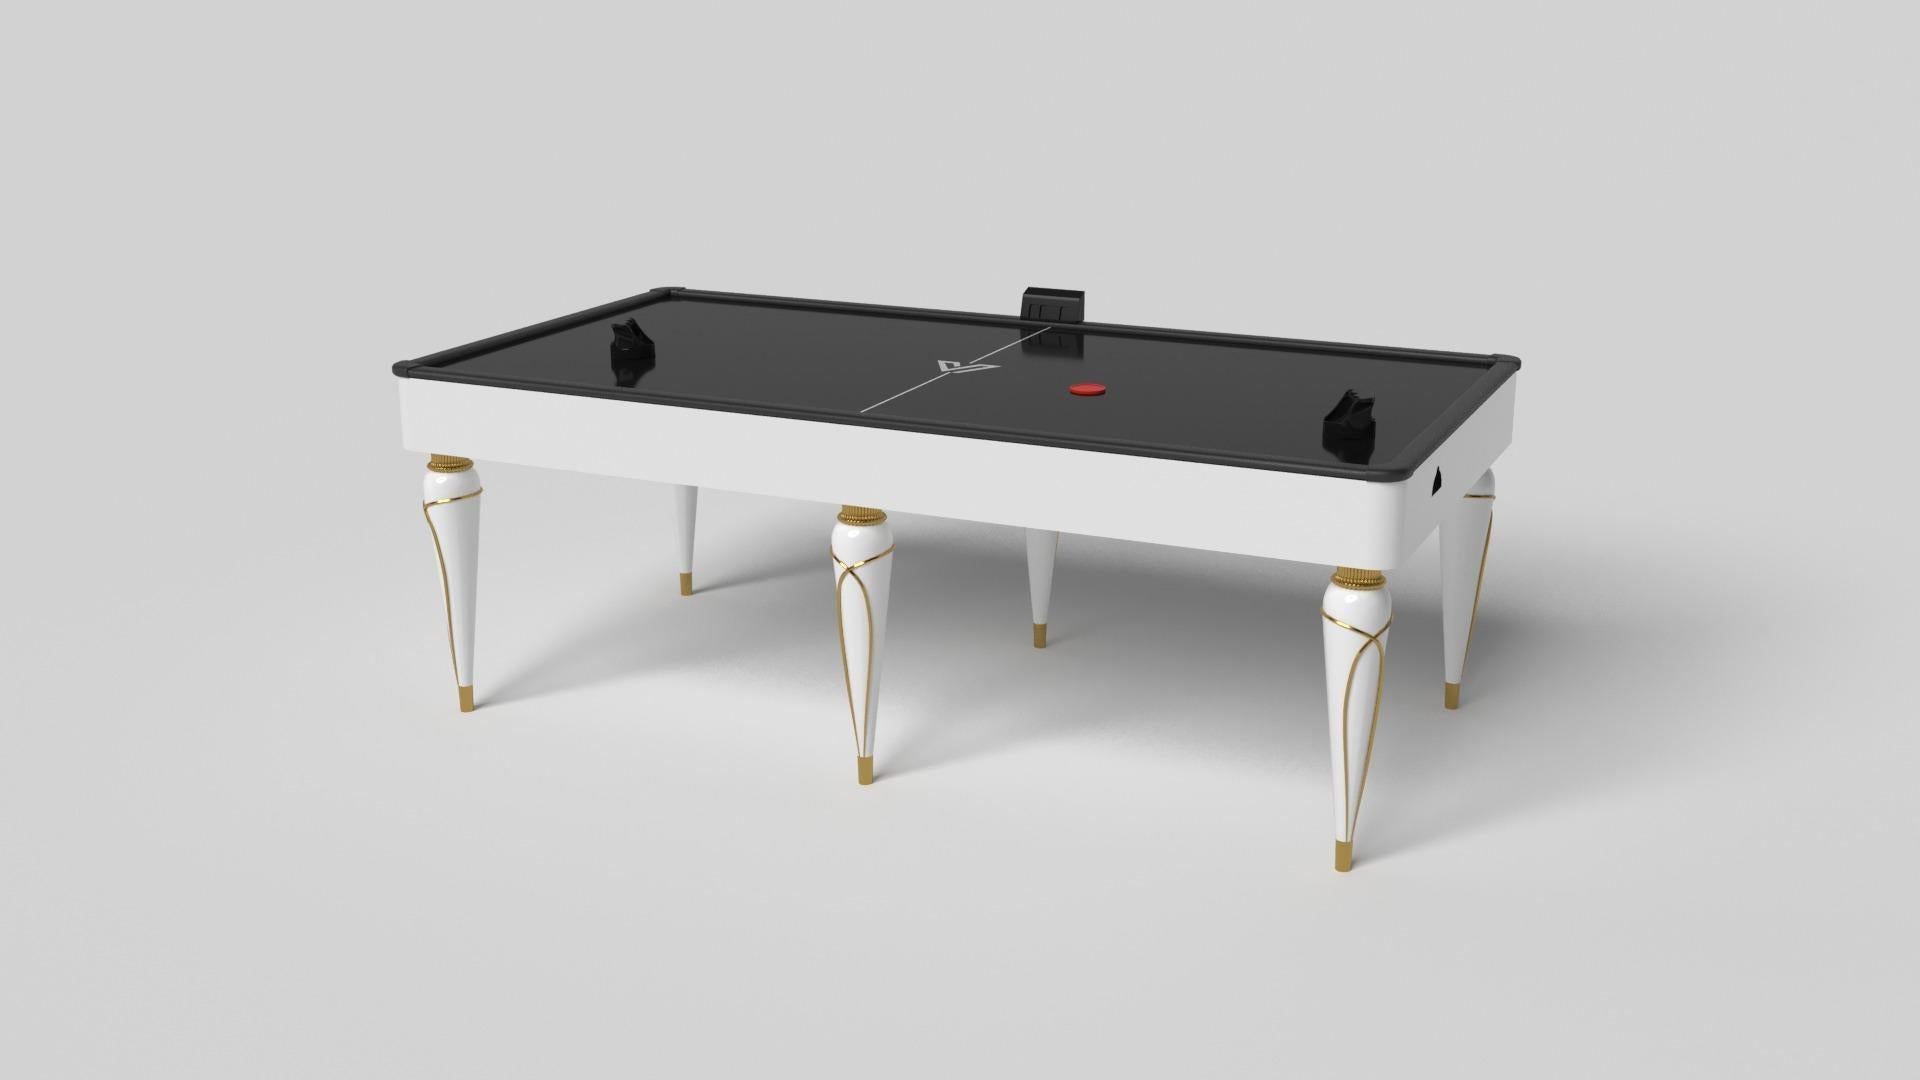 Champagne gold accents add undeniable elegance to this luxury air hockey table. Offering superior playability and uncompromised style, this design features hand carved details, decorative metal elements, and metal sabots at the bottom of each leg.